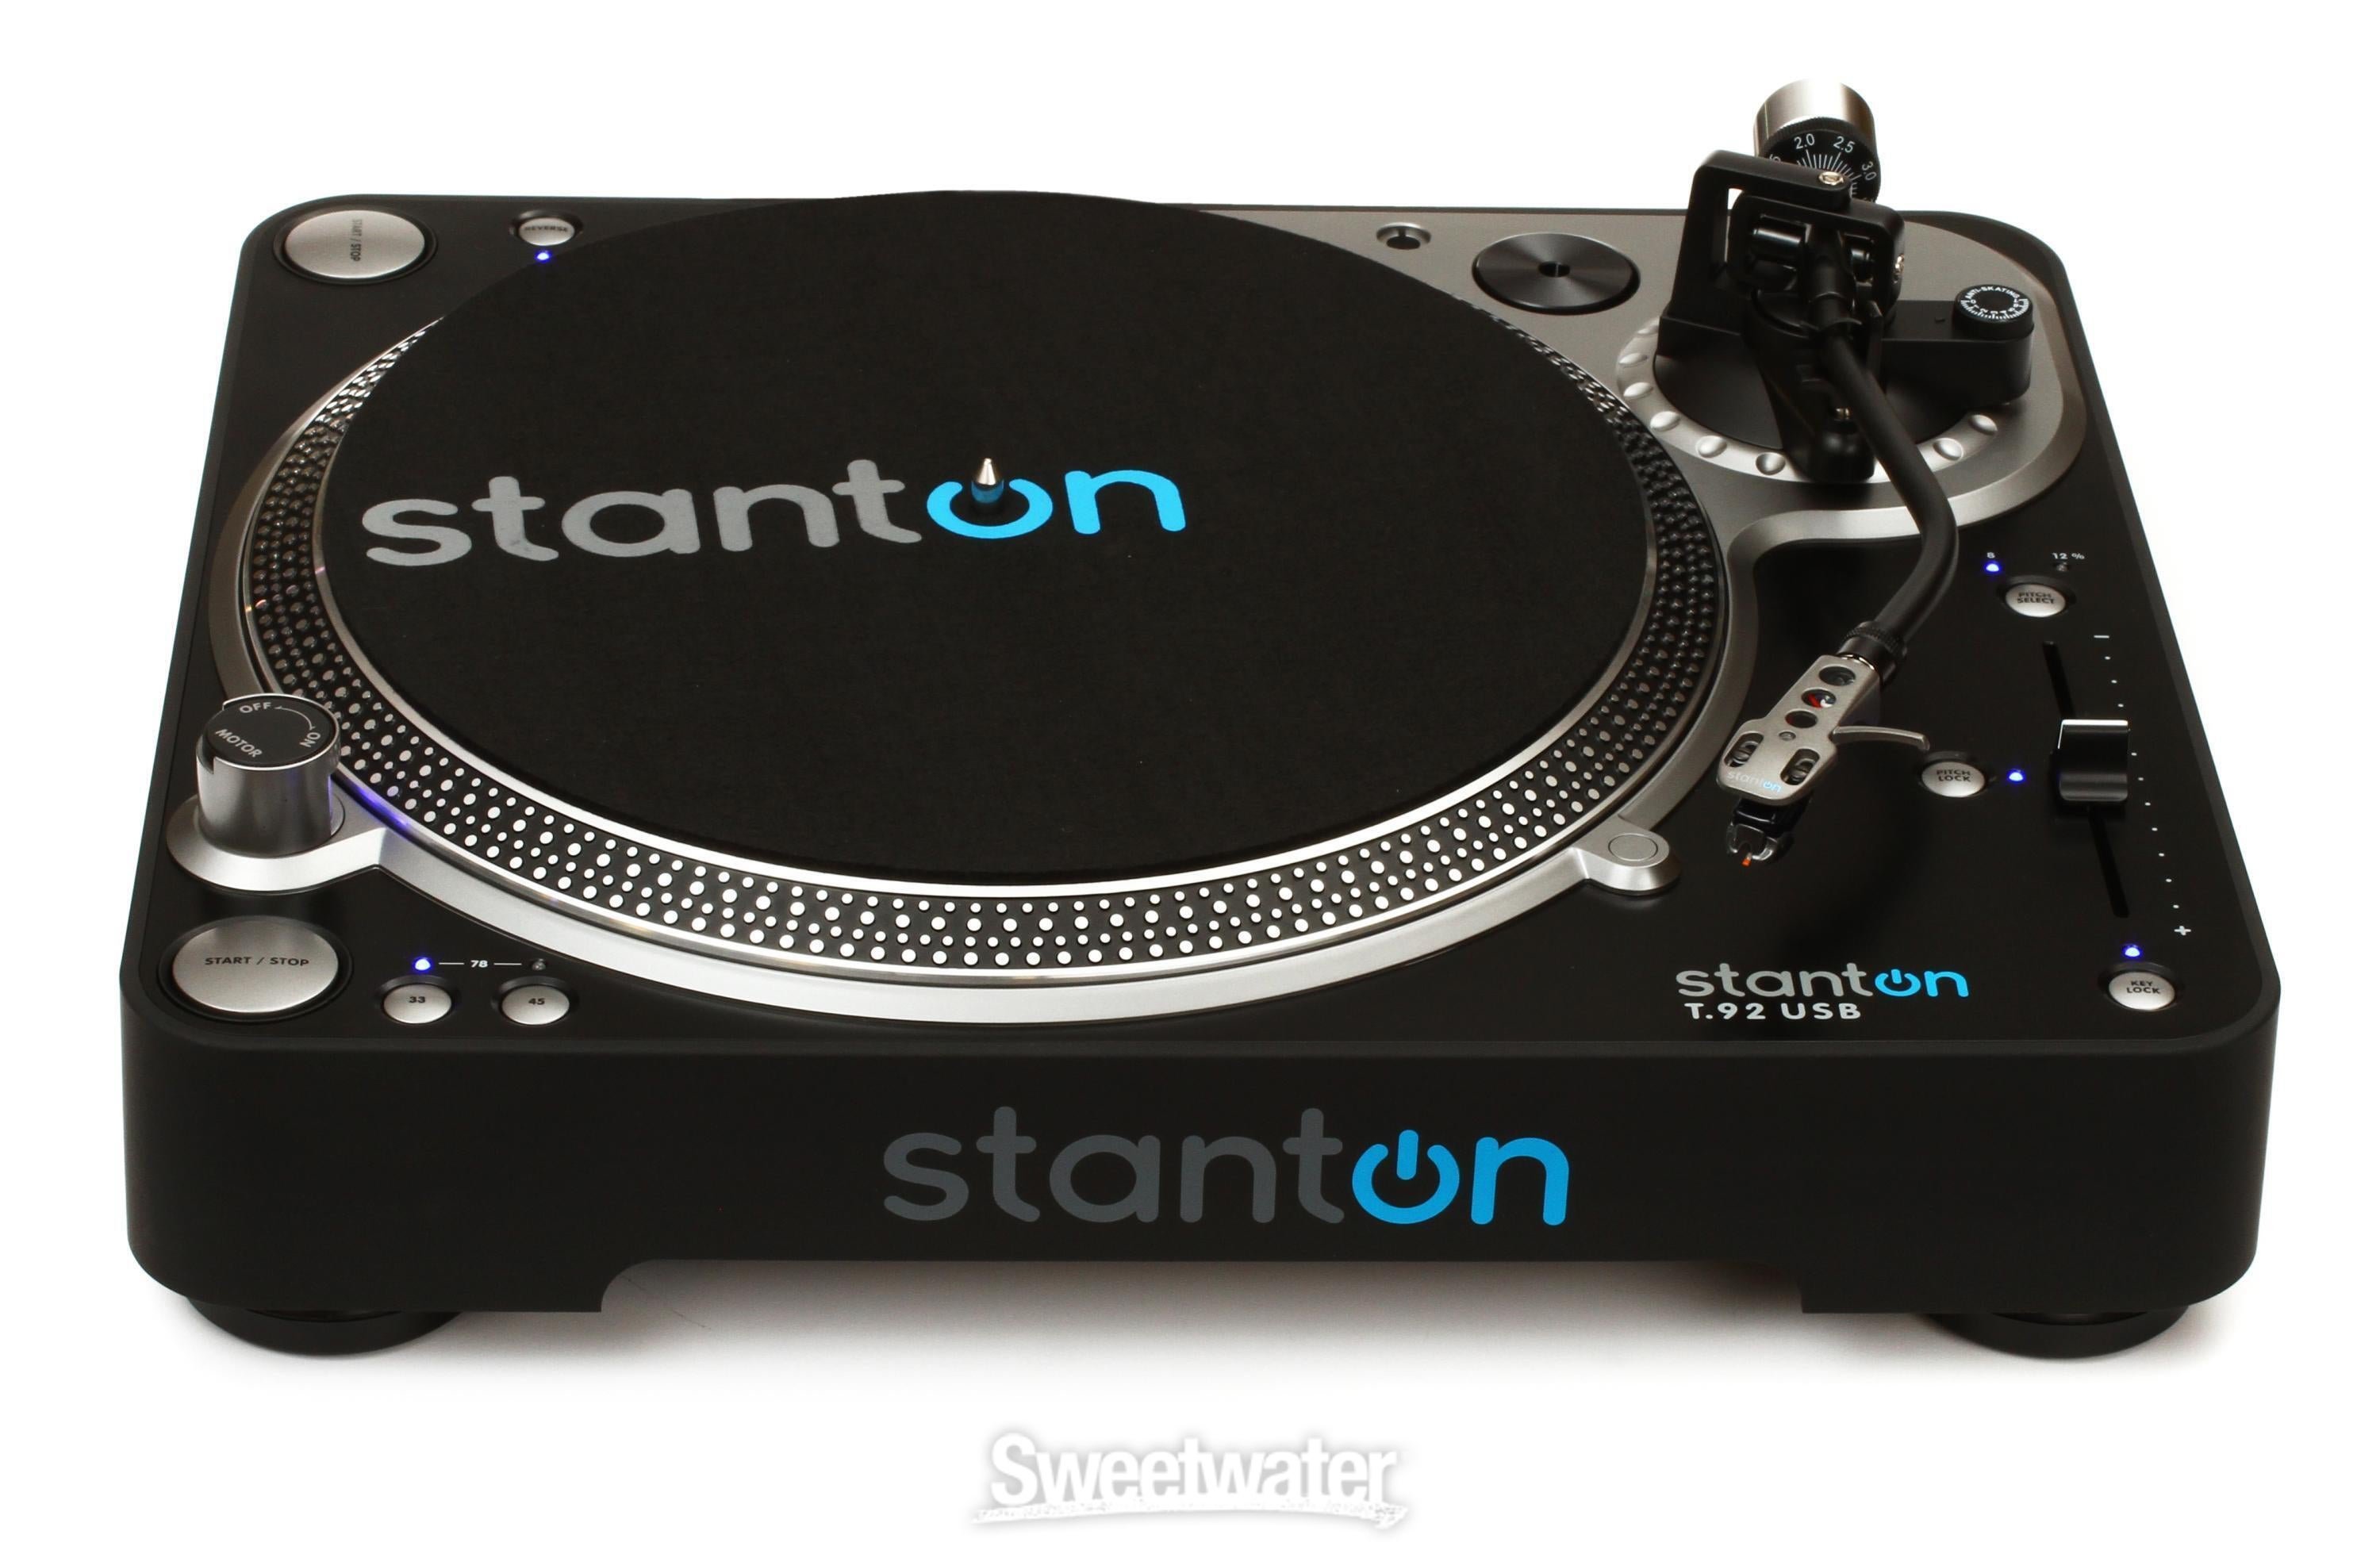 Stanton T.92 USB Turntable | Sweetwater